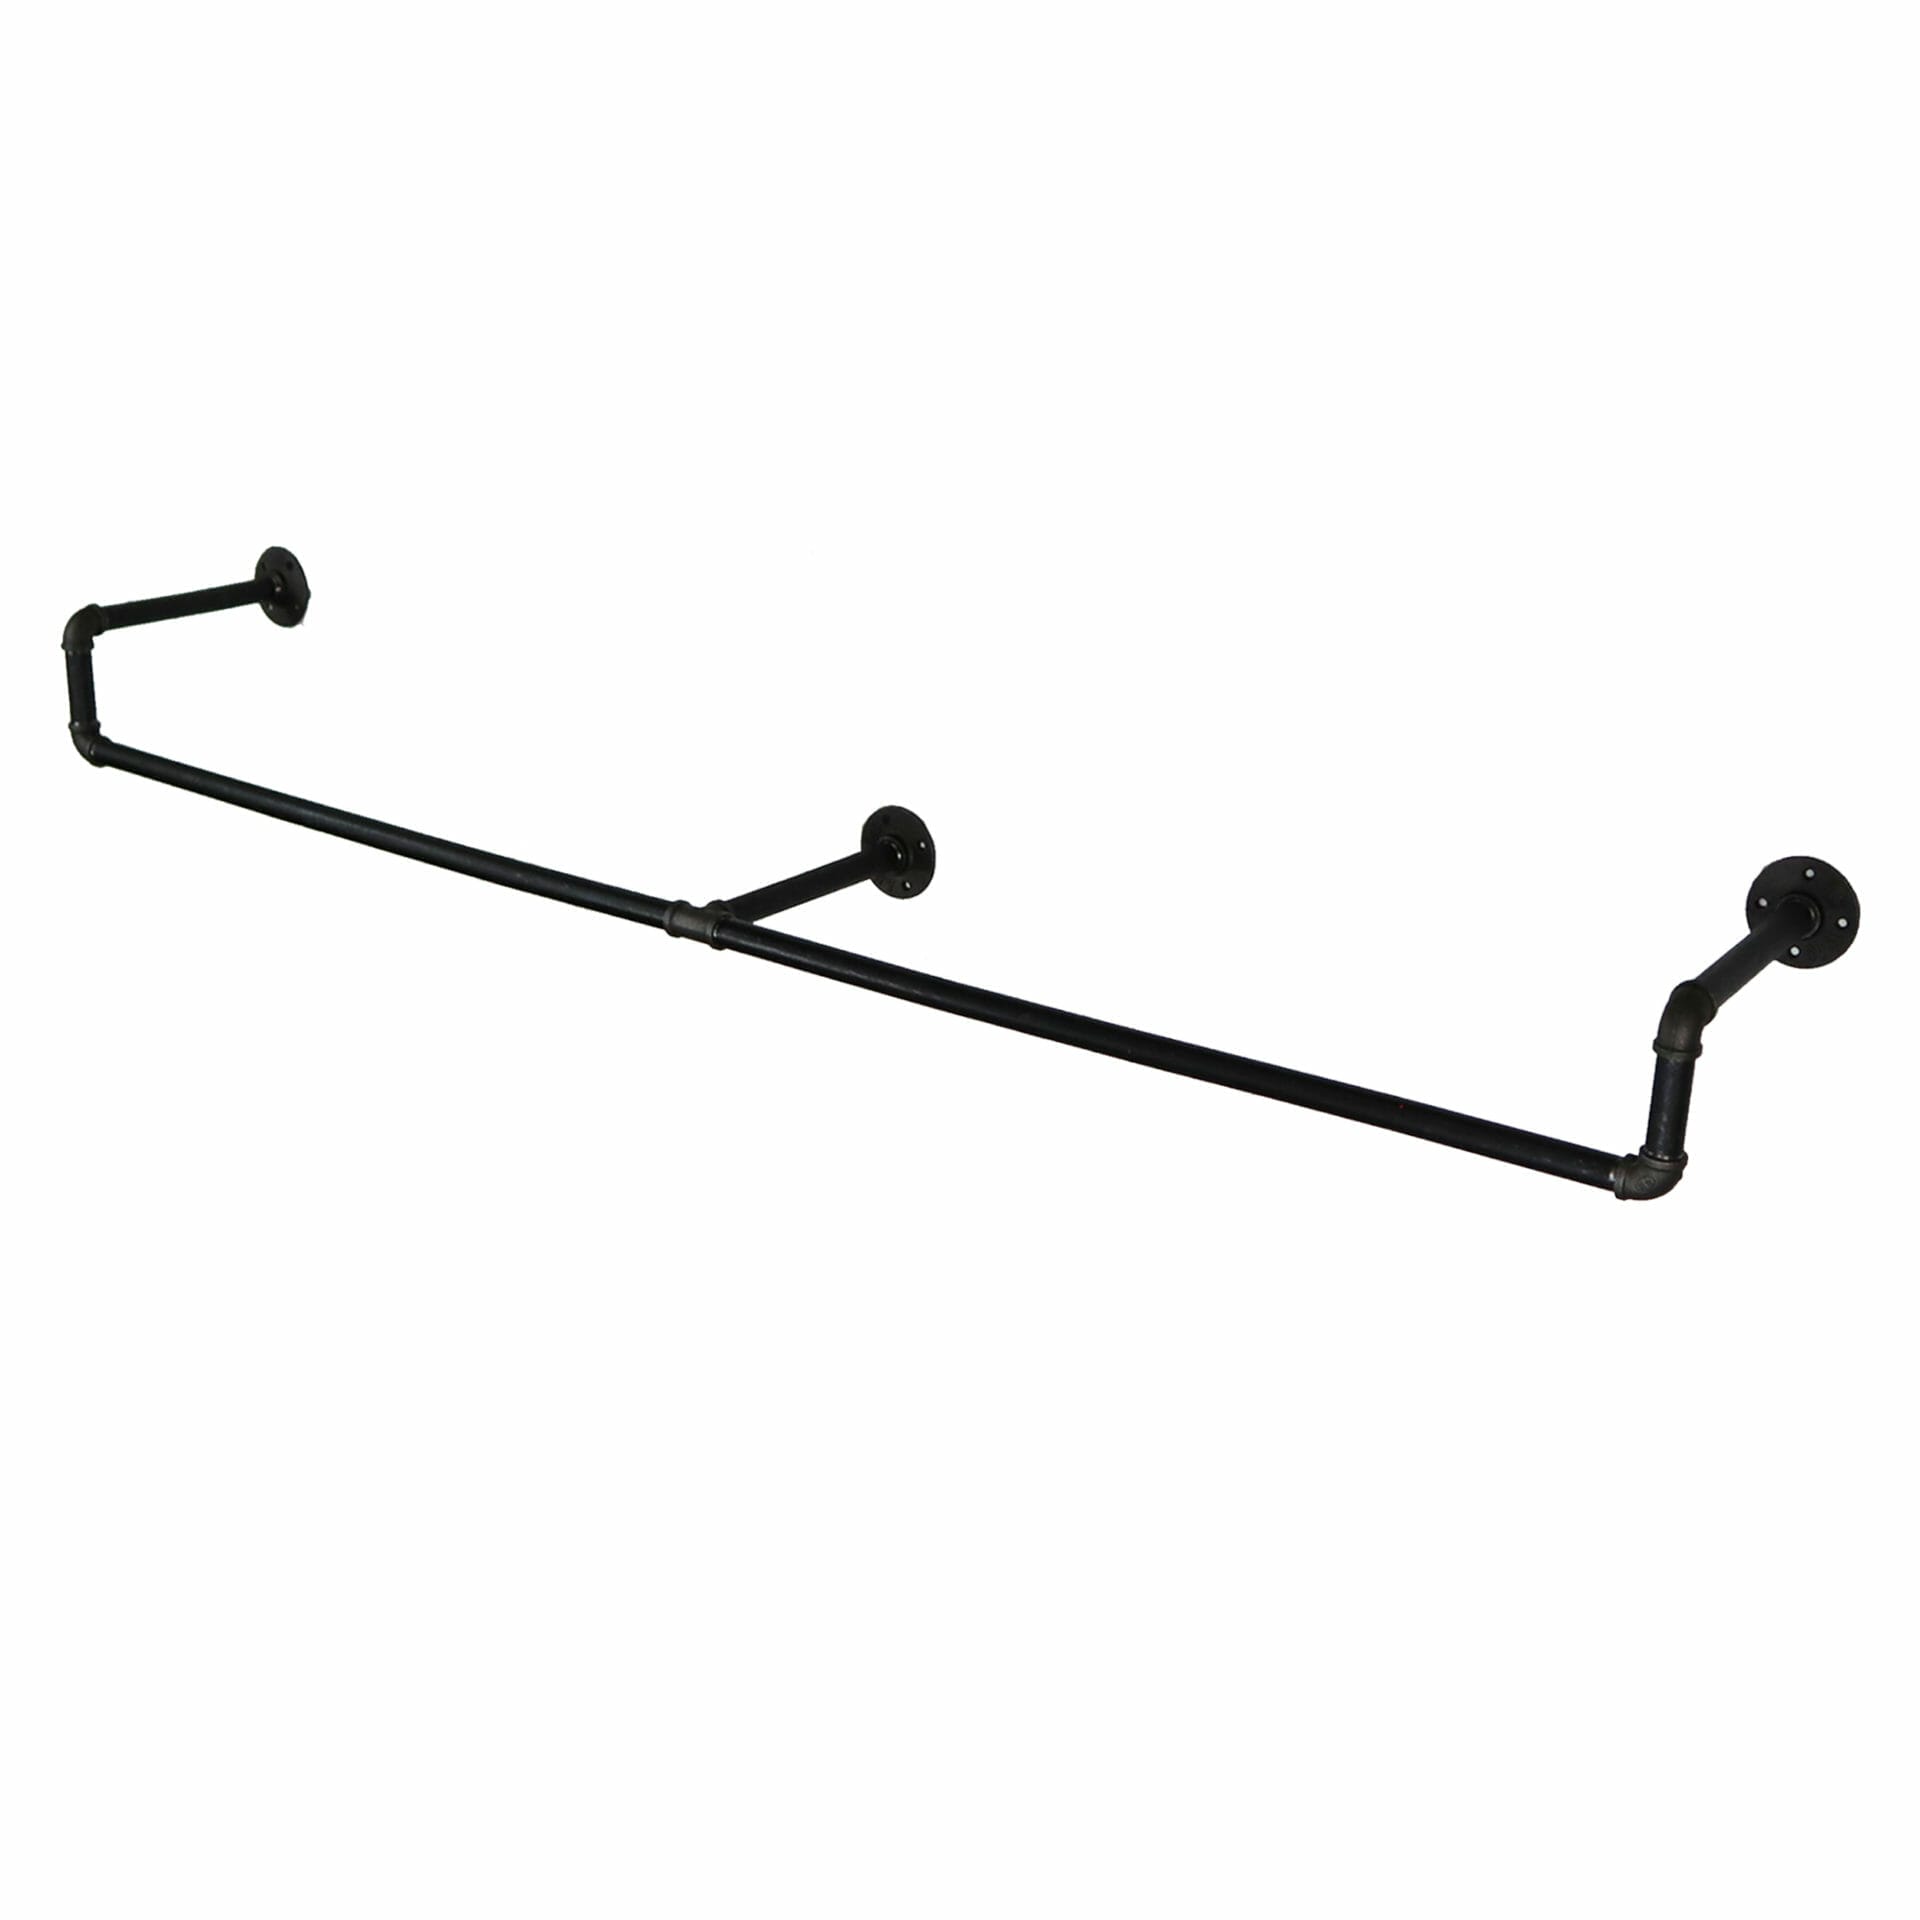 Wall Mounted Drop Down Clothes Rail | Industrial Raw Steel Pipe Style ...